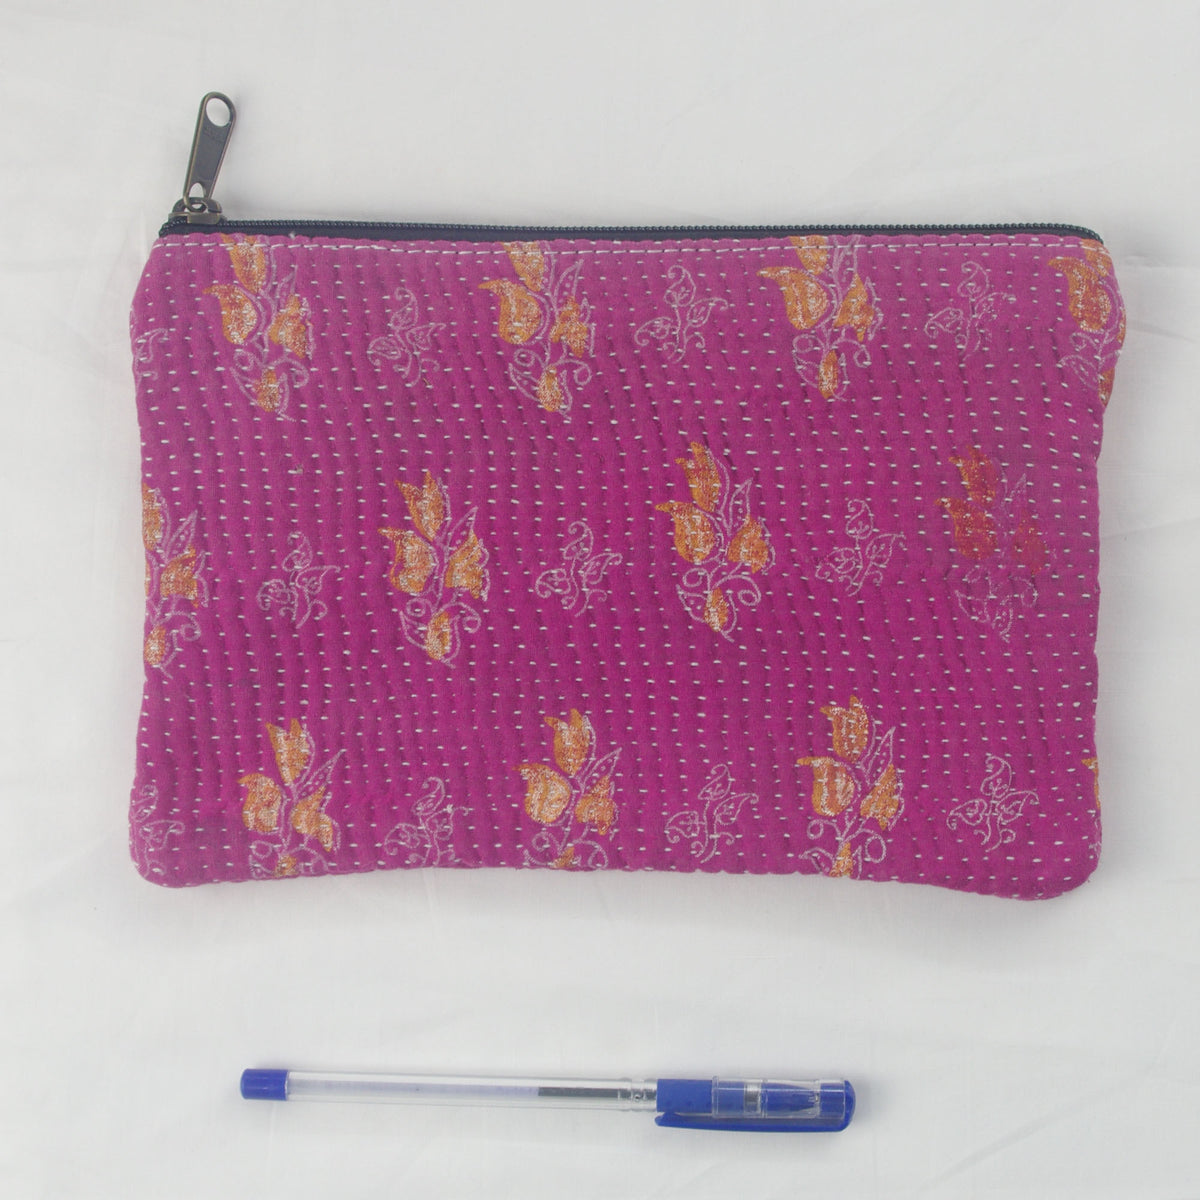 Vintage Kantha Pouch, Cosmetic Bag - Pink Floral